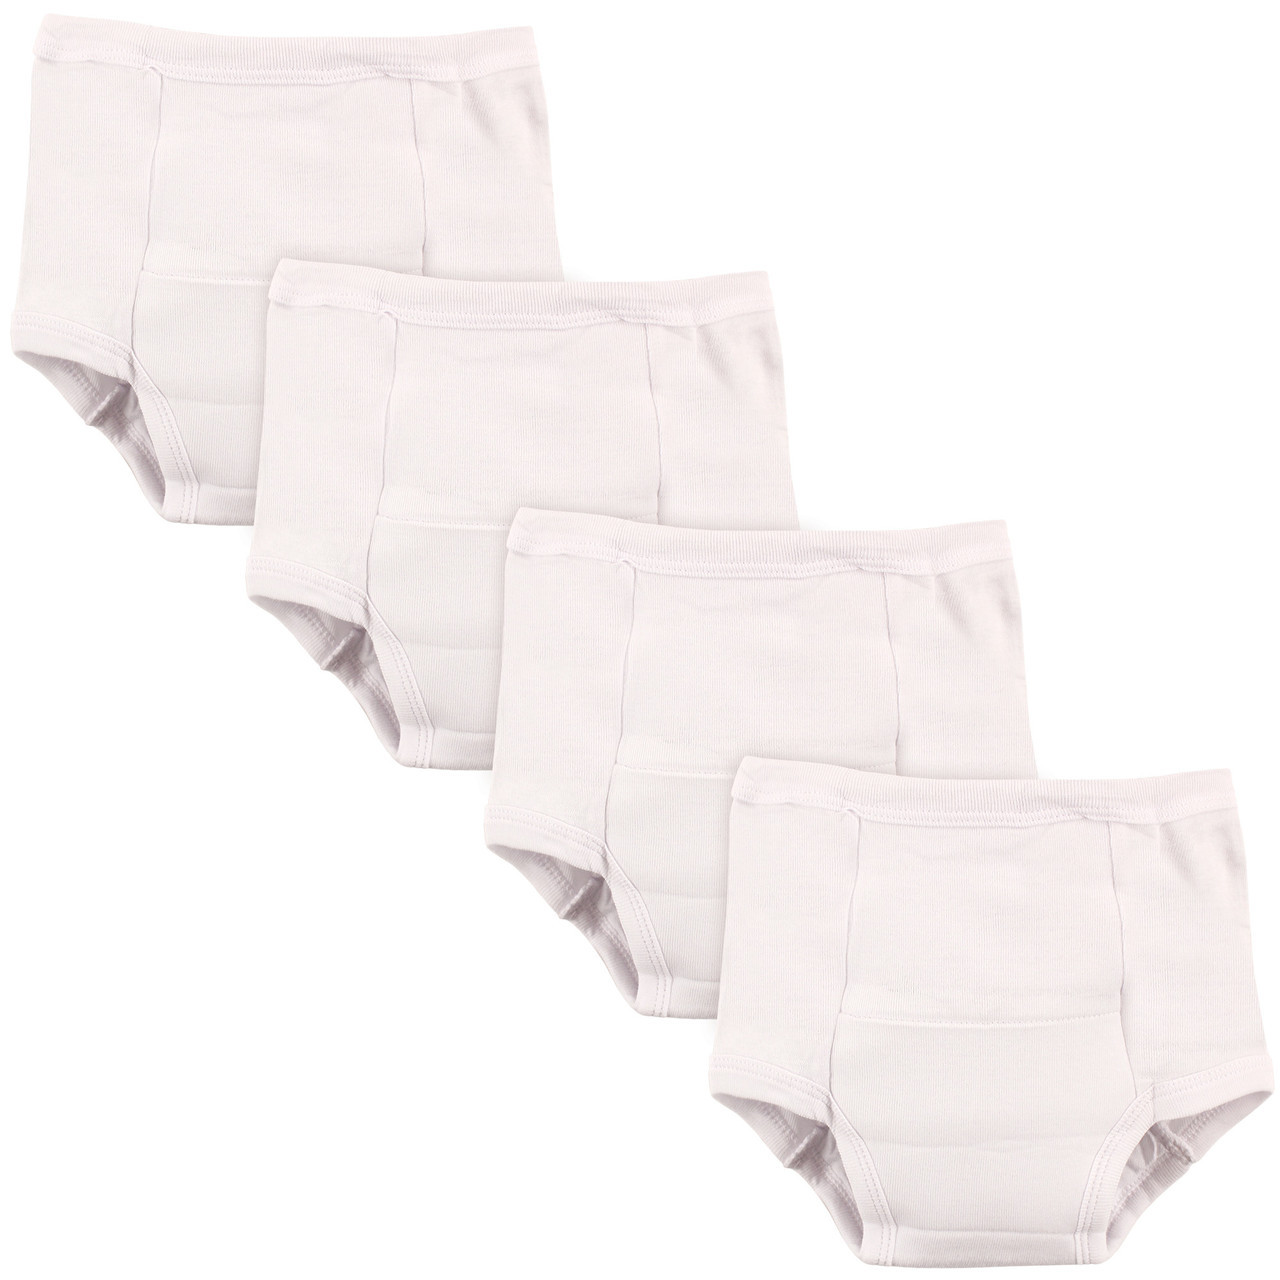 Luvable Friends Toddler Water Resistant Training Pants, 4-Pack, White